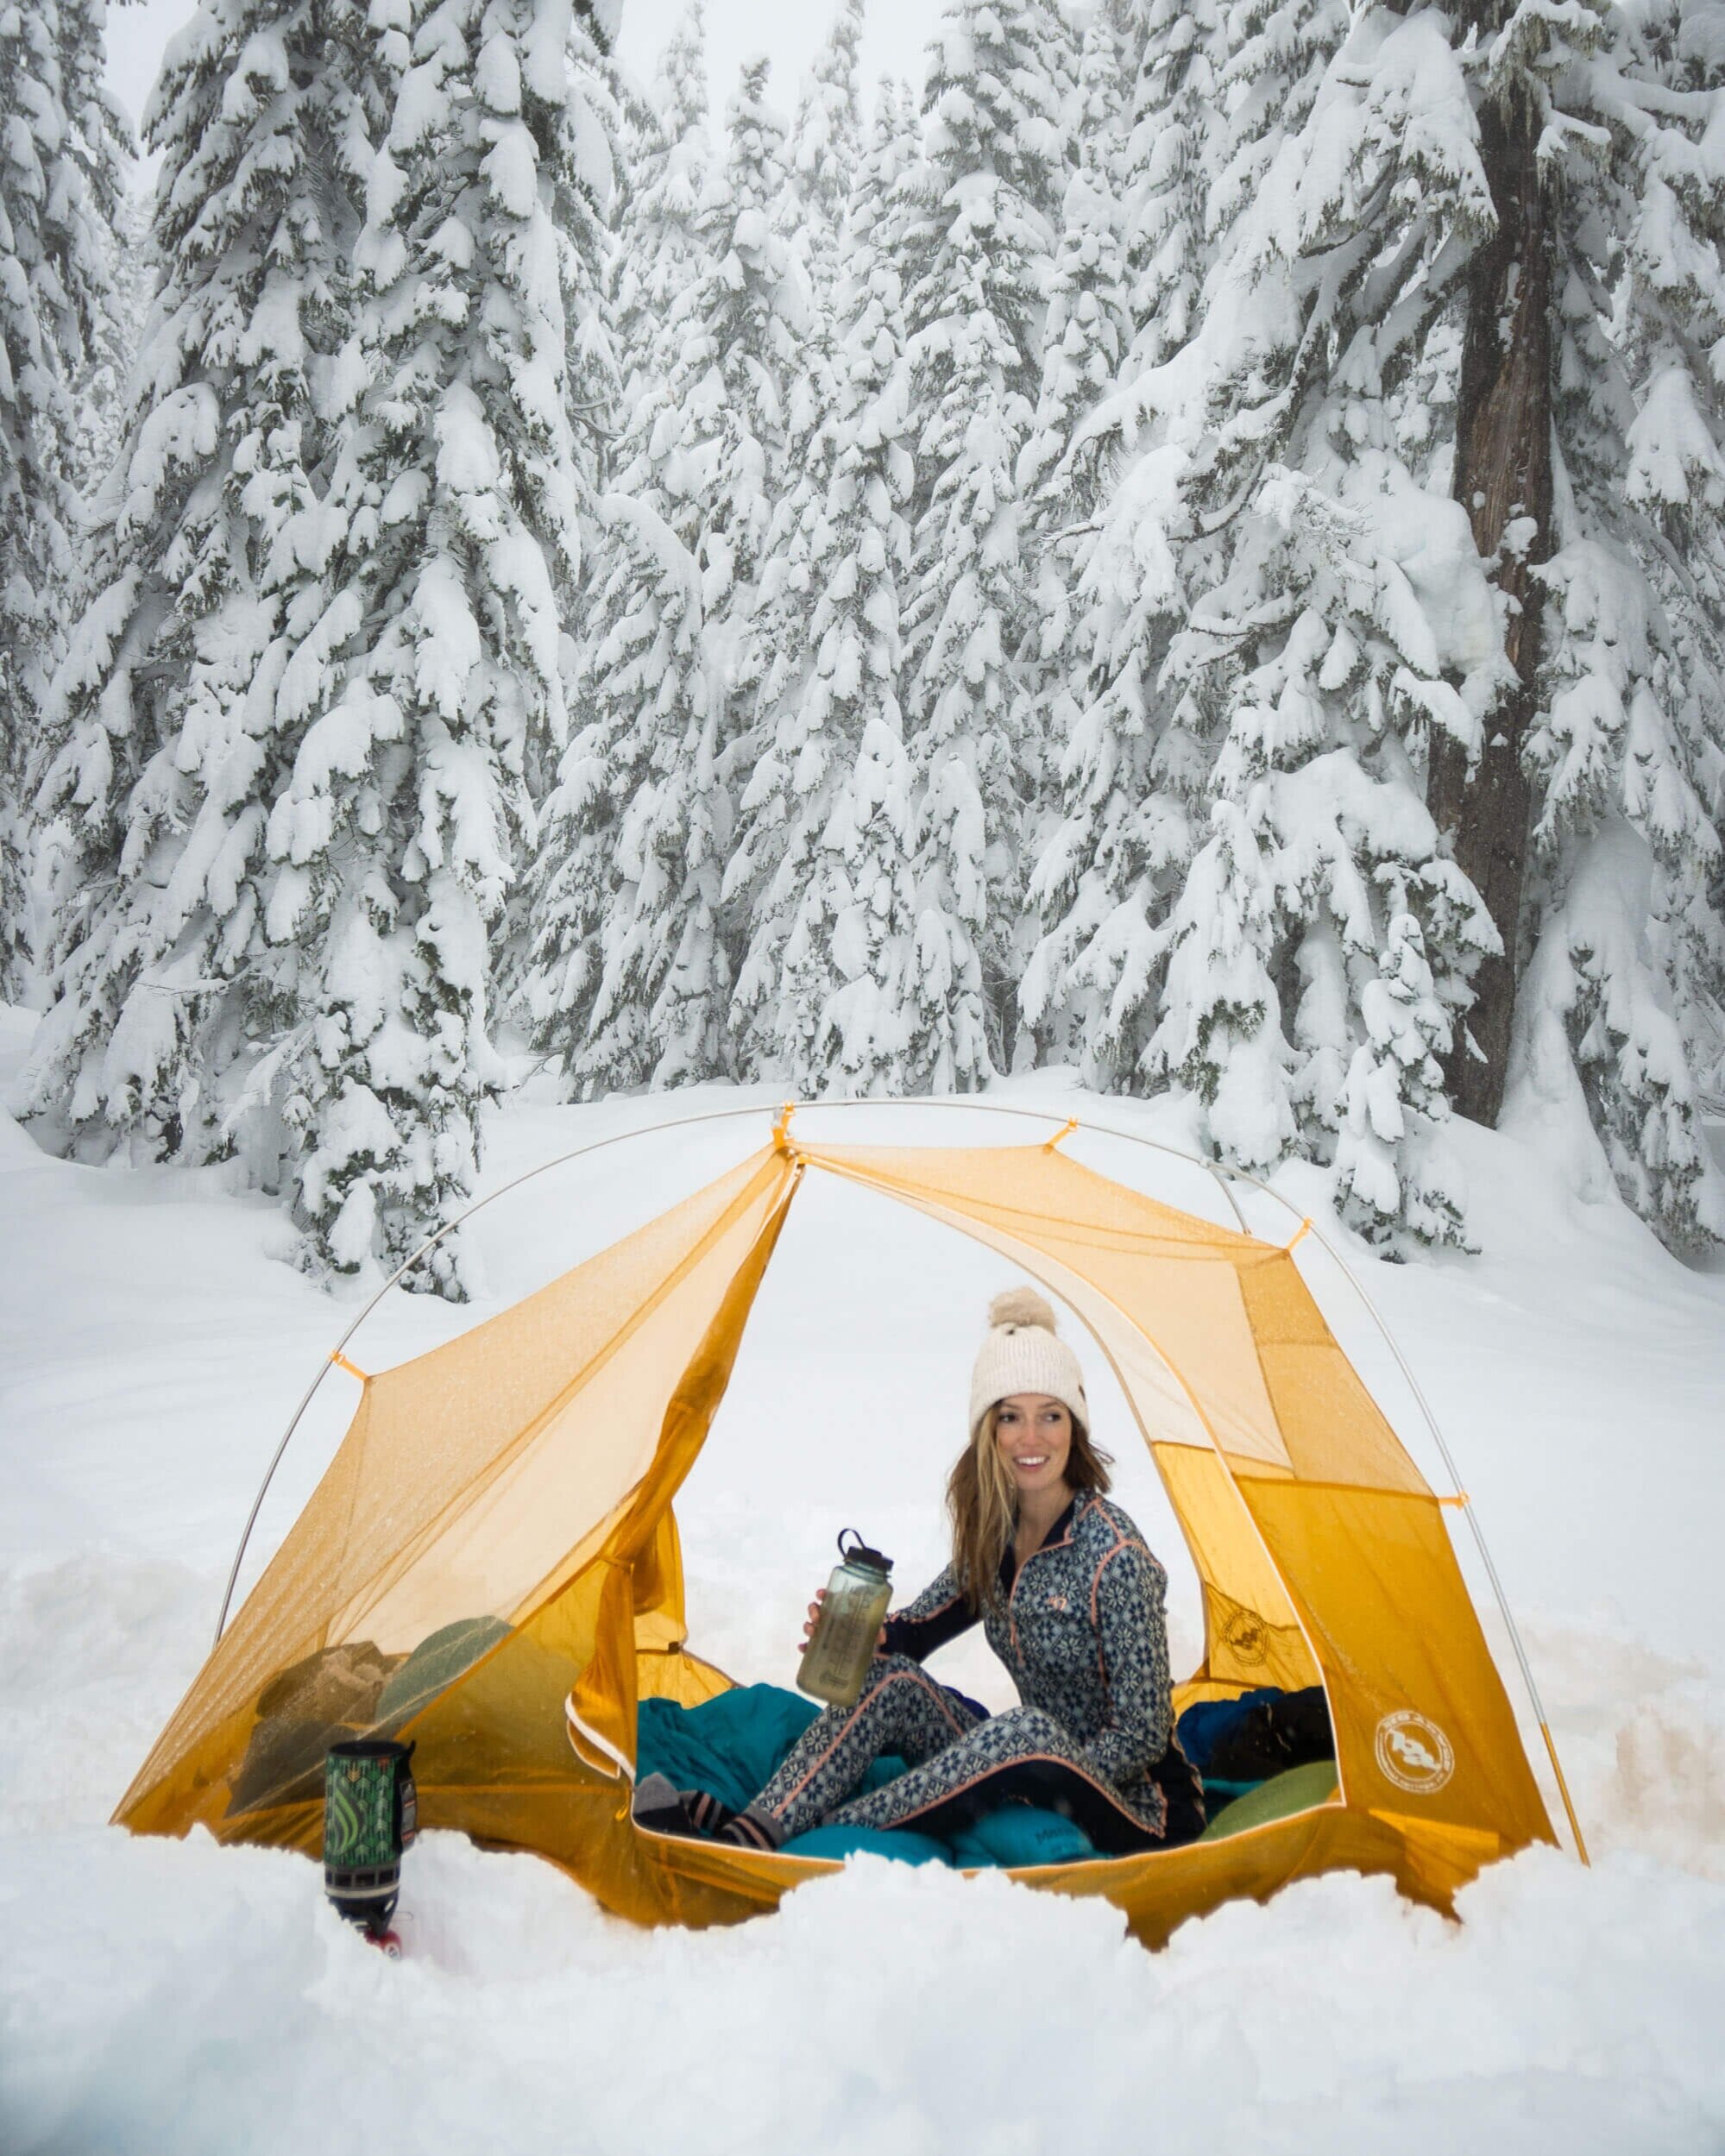 Top 5 hot tents for 2 people winter camping – Hot Tent Camping